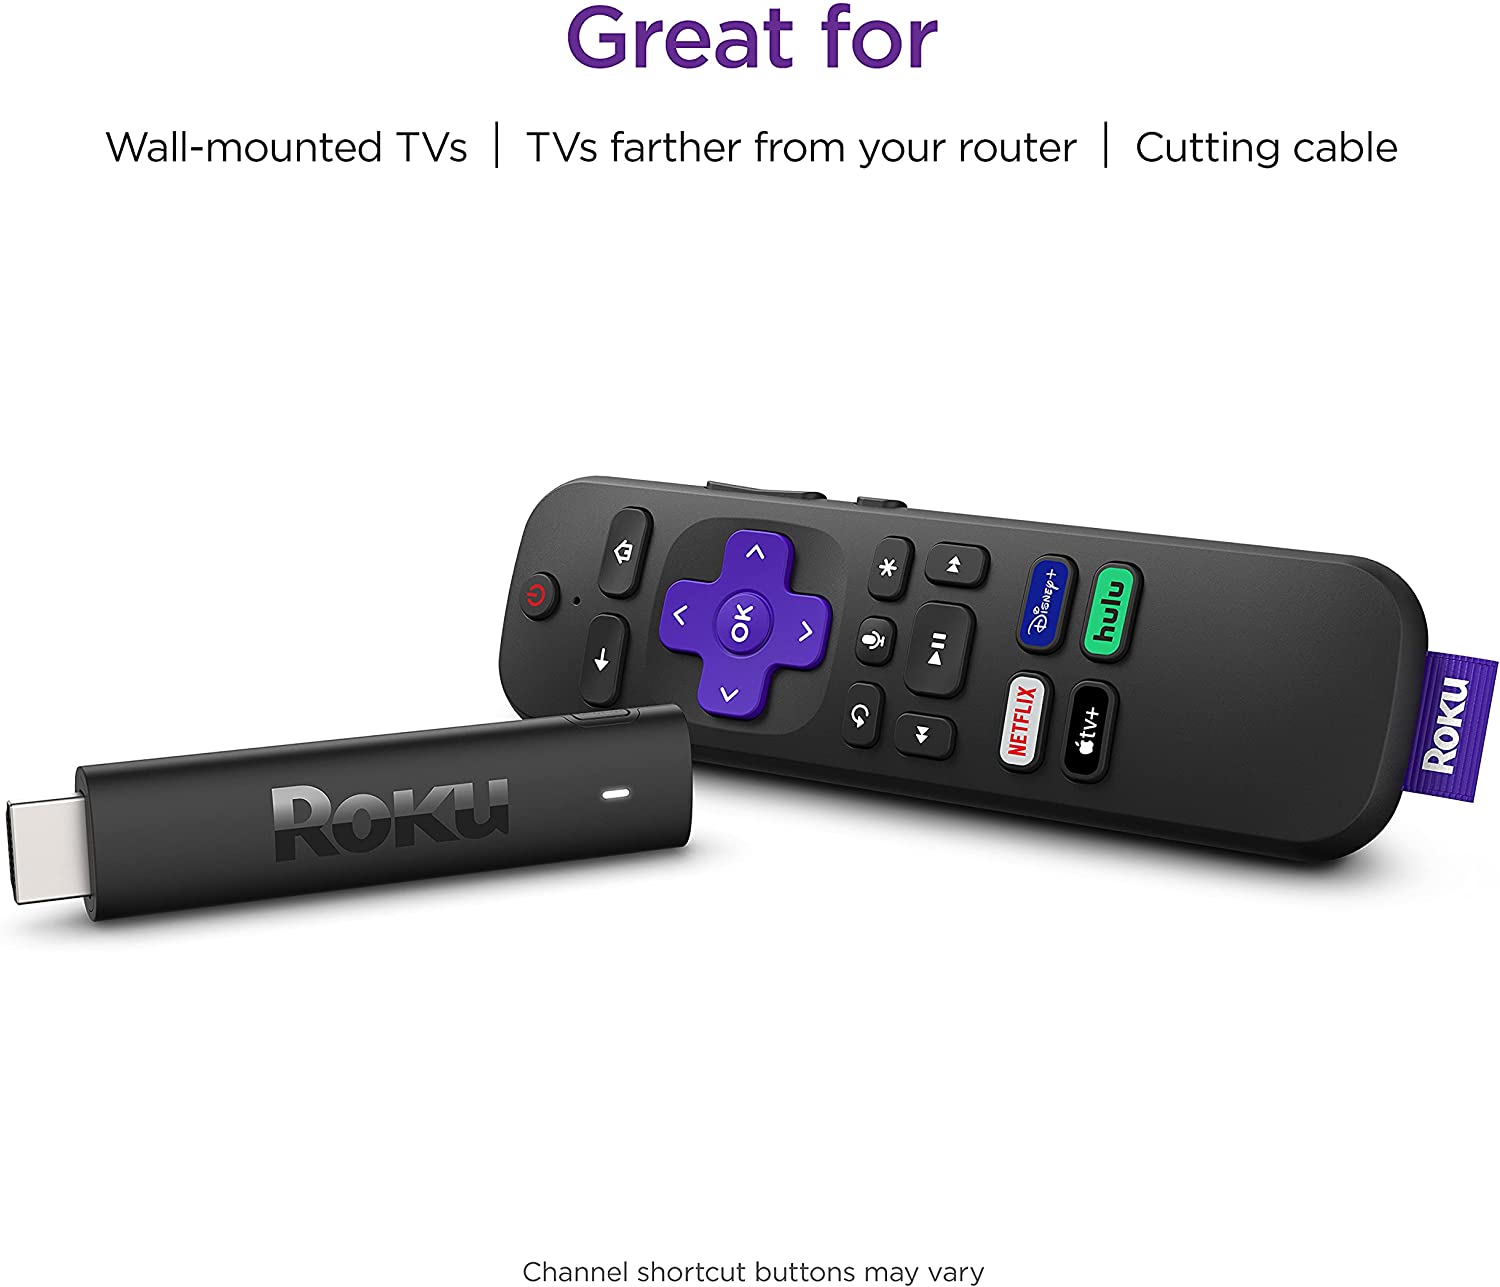 2 Pack Roku Streaming Stick 4K 2021 Streaming Device 4K/HDR/Dolby Vision with Roku Voice Remote and TV Controls - Pro-Distributing